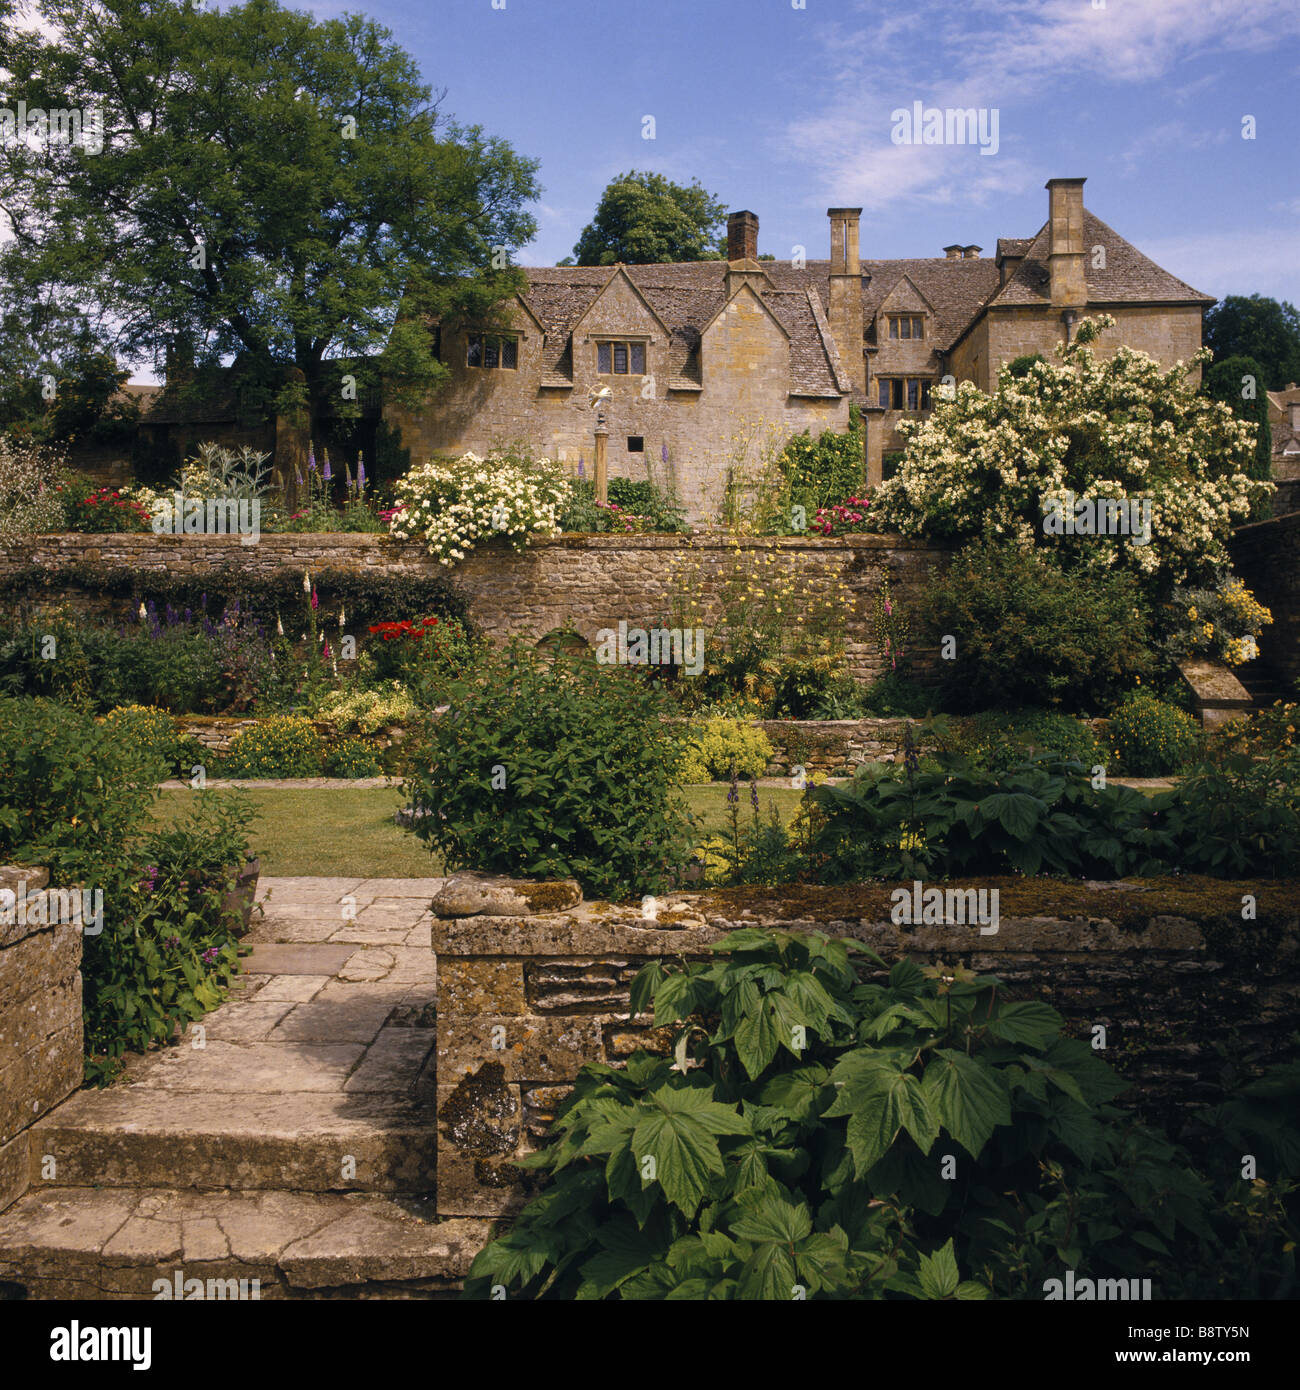 View of the west front of Snowshill Manor seen from the Well Court with flowers and foilage Stock Photo